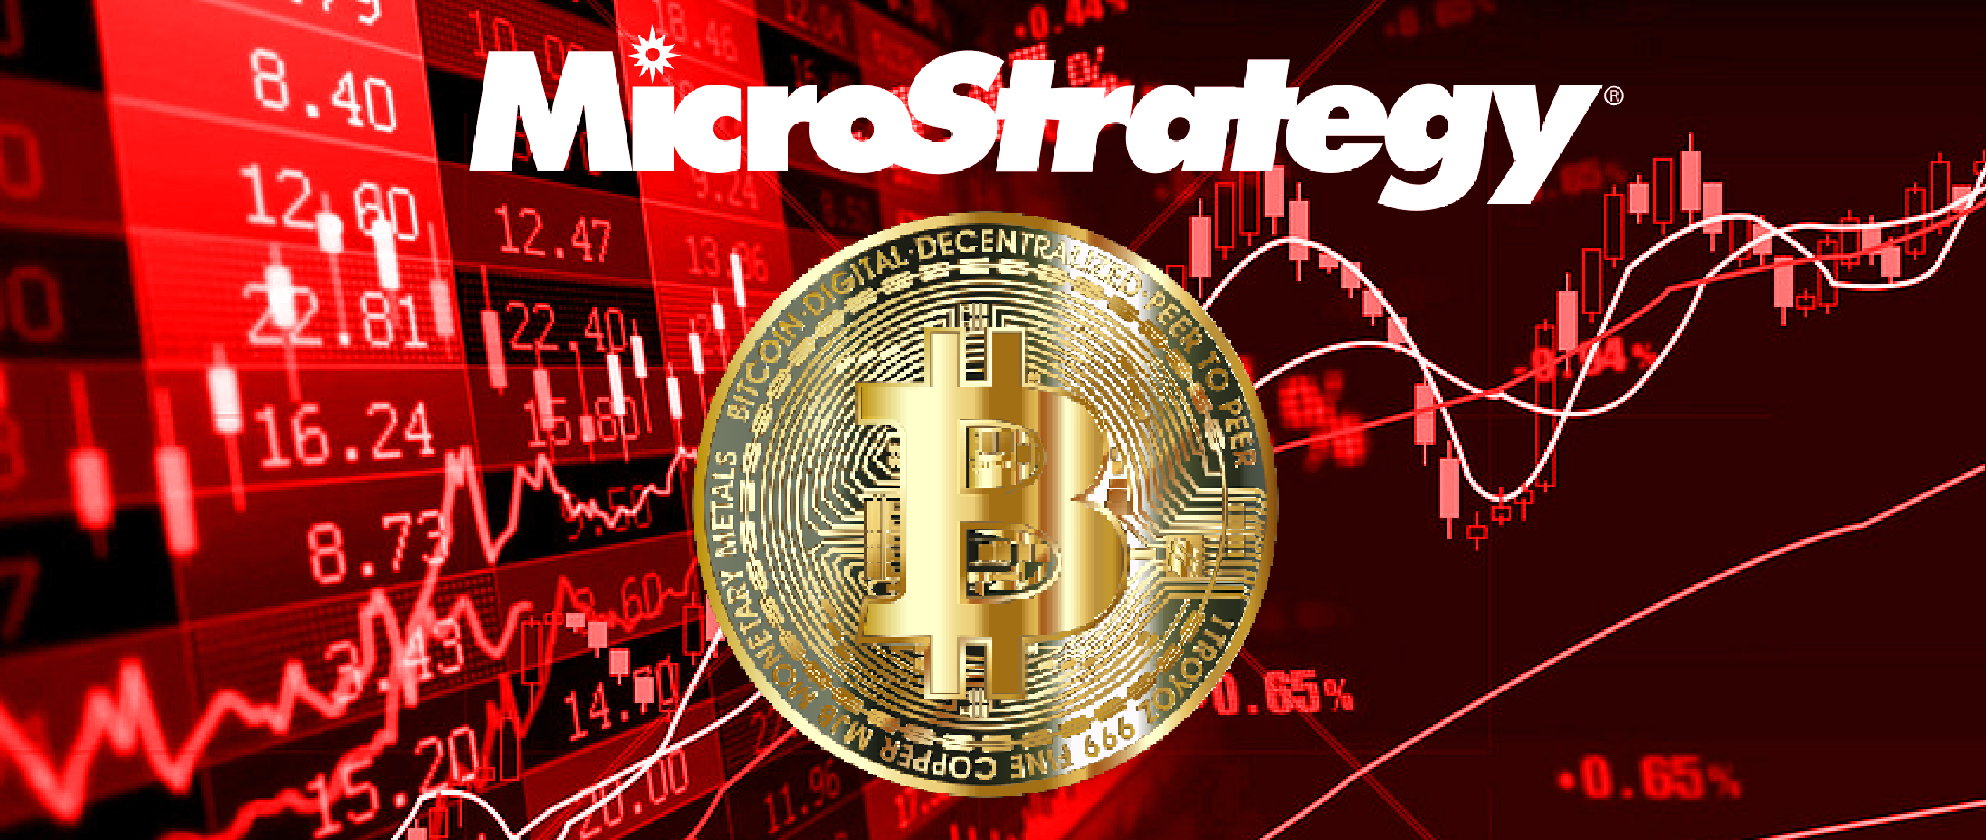 BTC Price Gains 4% Pre-Fed as MicroStrategy Vows to Protect Bitcoin